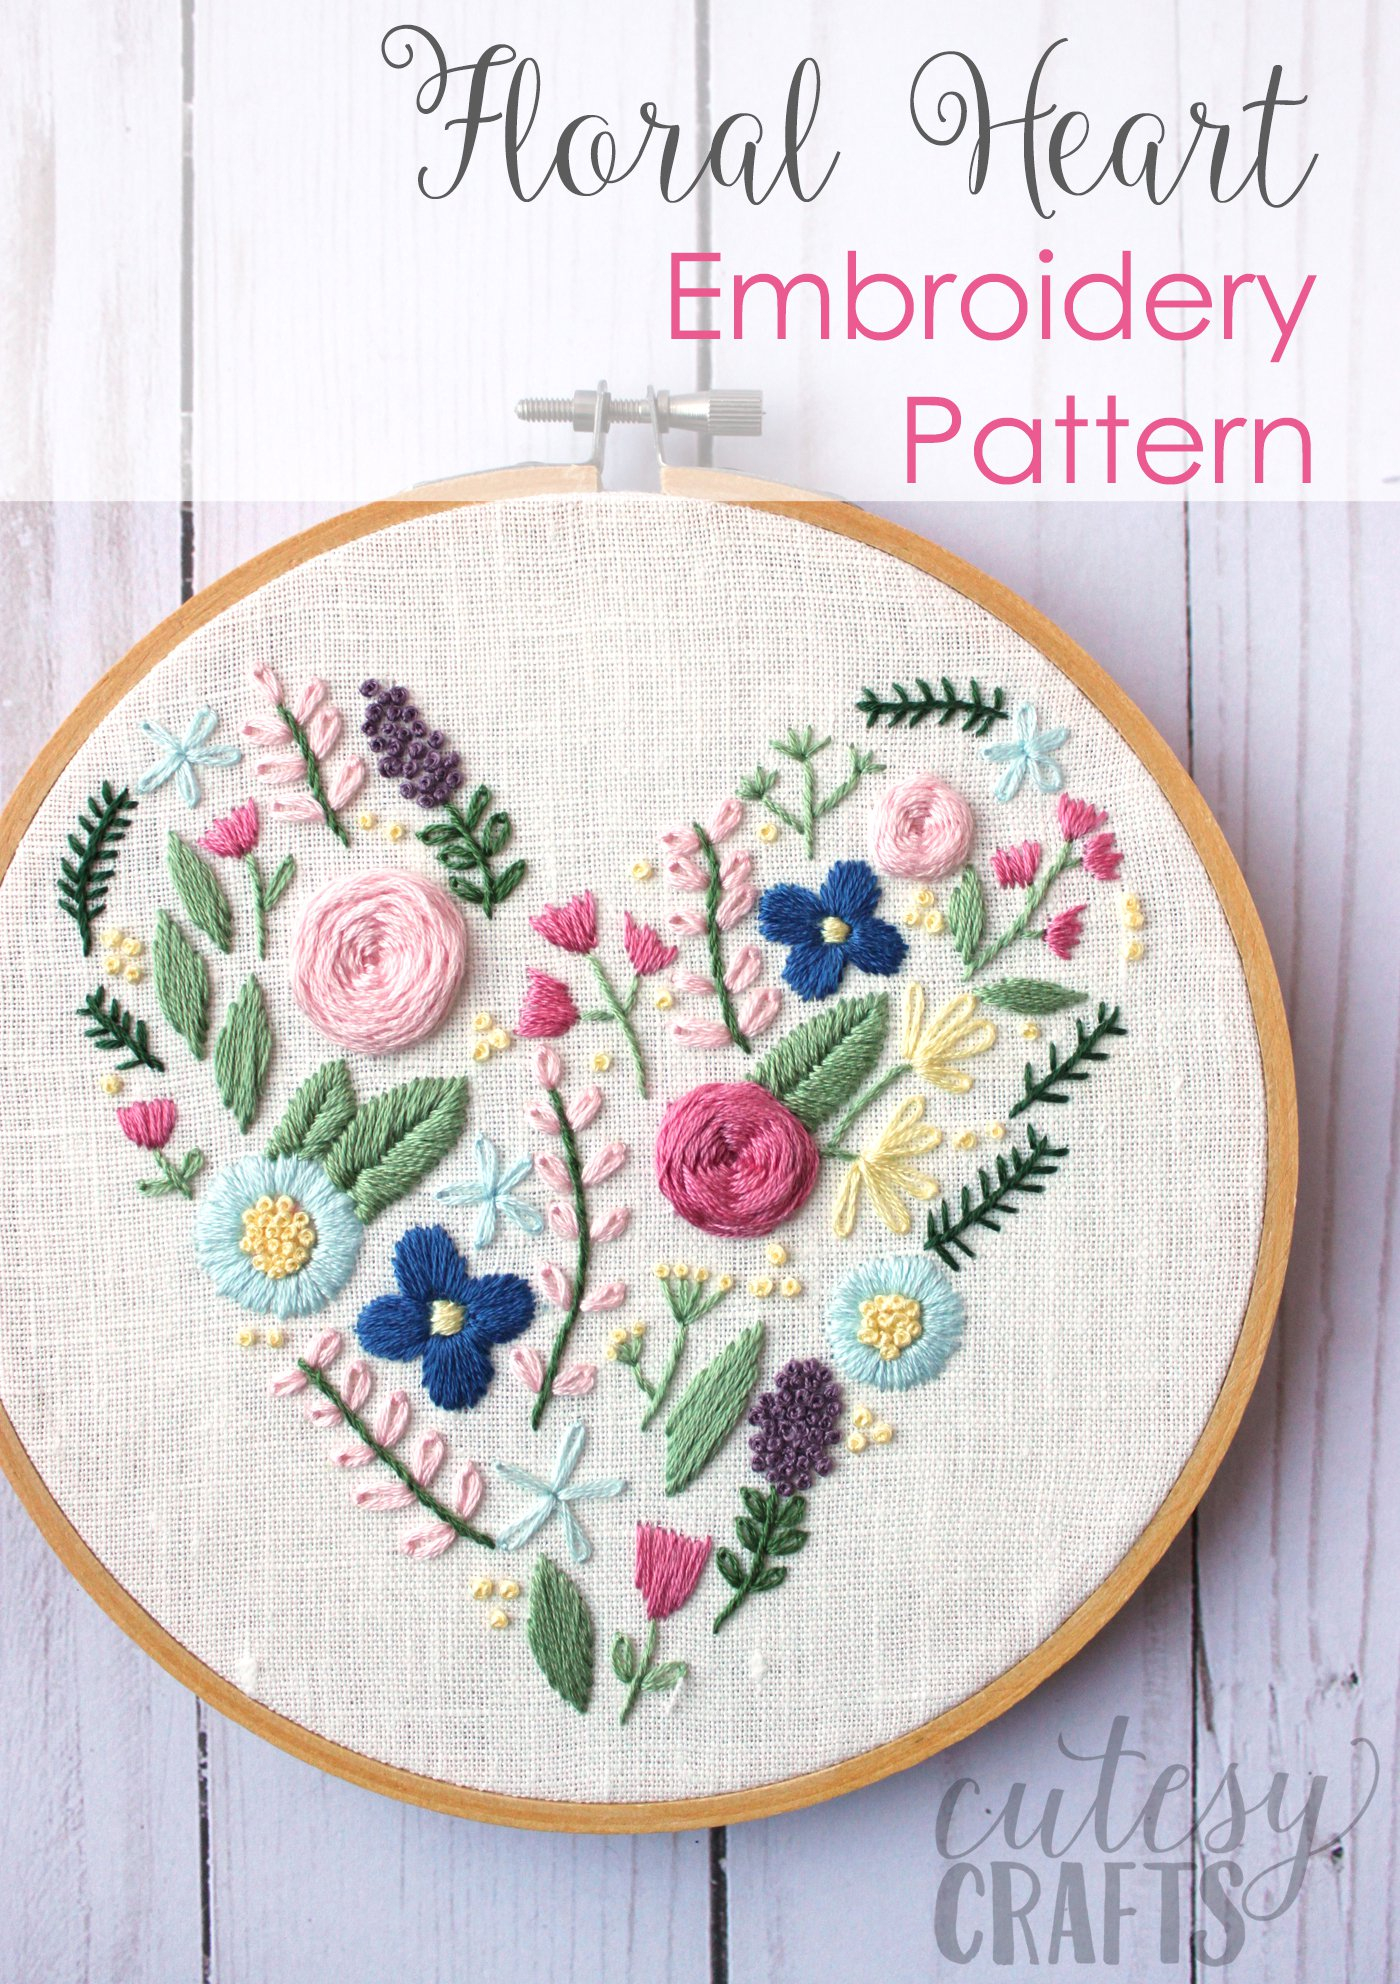 Embroidery Patterns Free Floral Heart Hand Embroidery Pattern The Polka Dot Chair